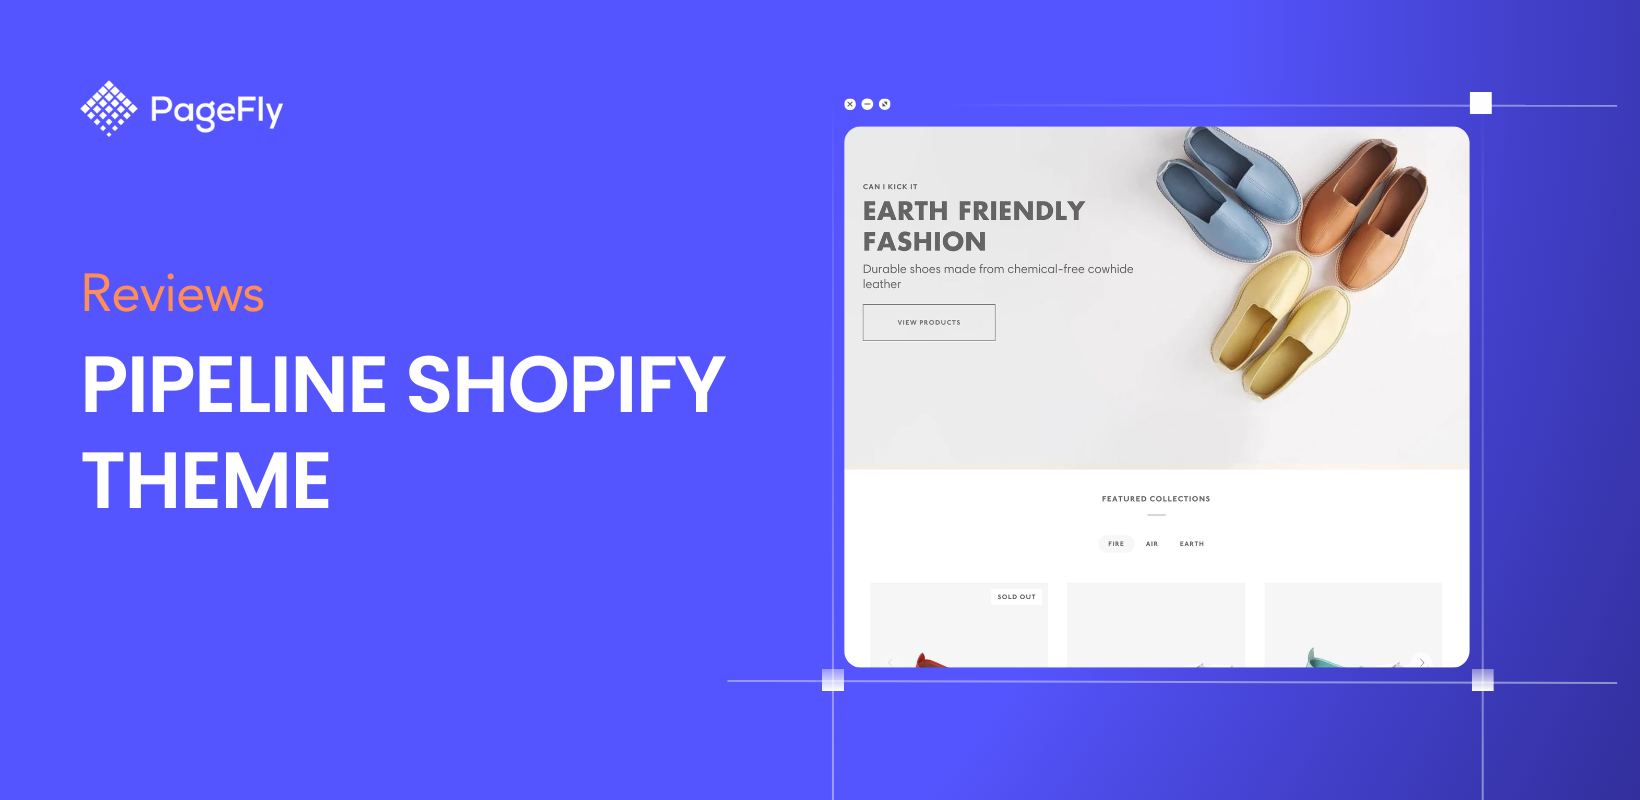 Pipeline Shopify Theme Review: Can A Clean Design Make Your Store Charming?